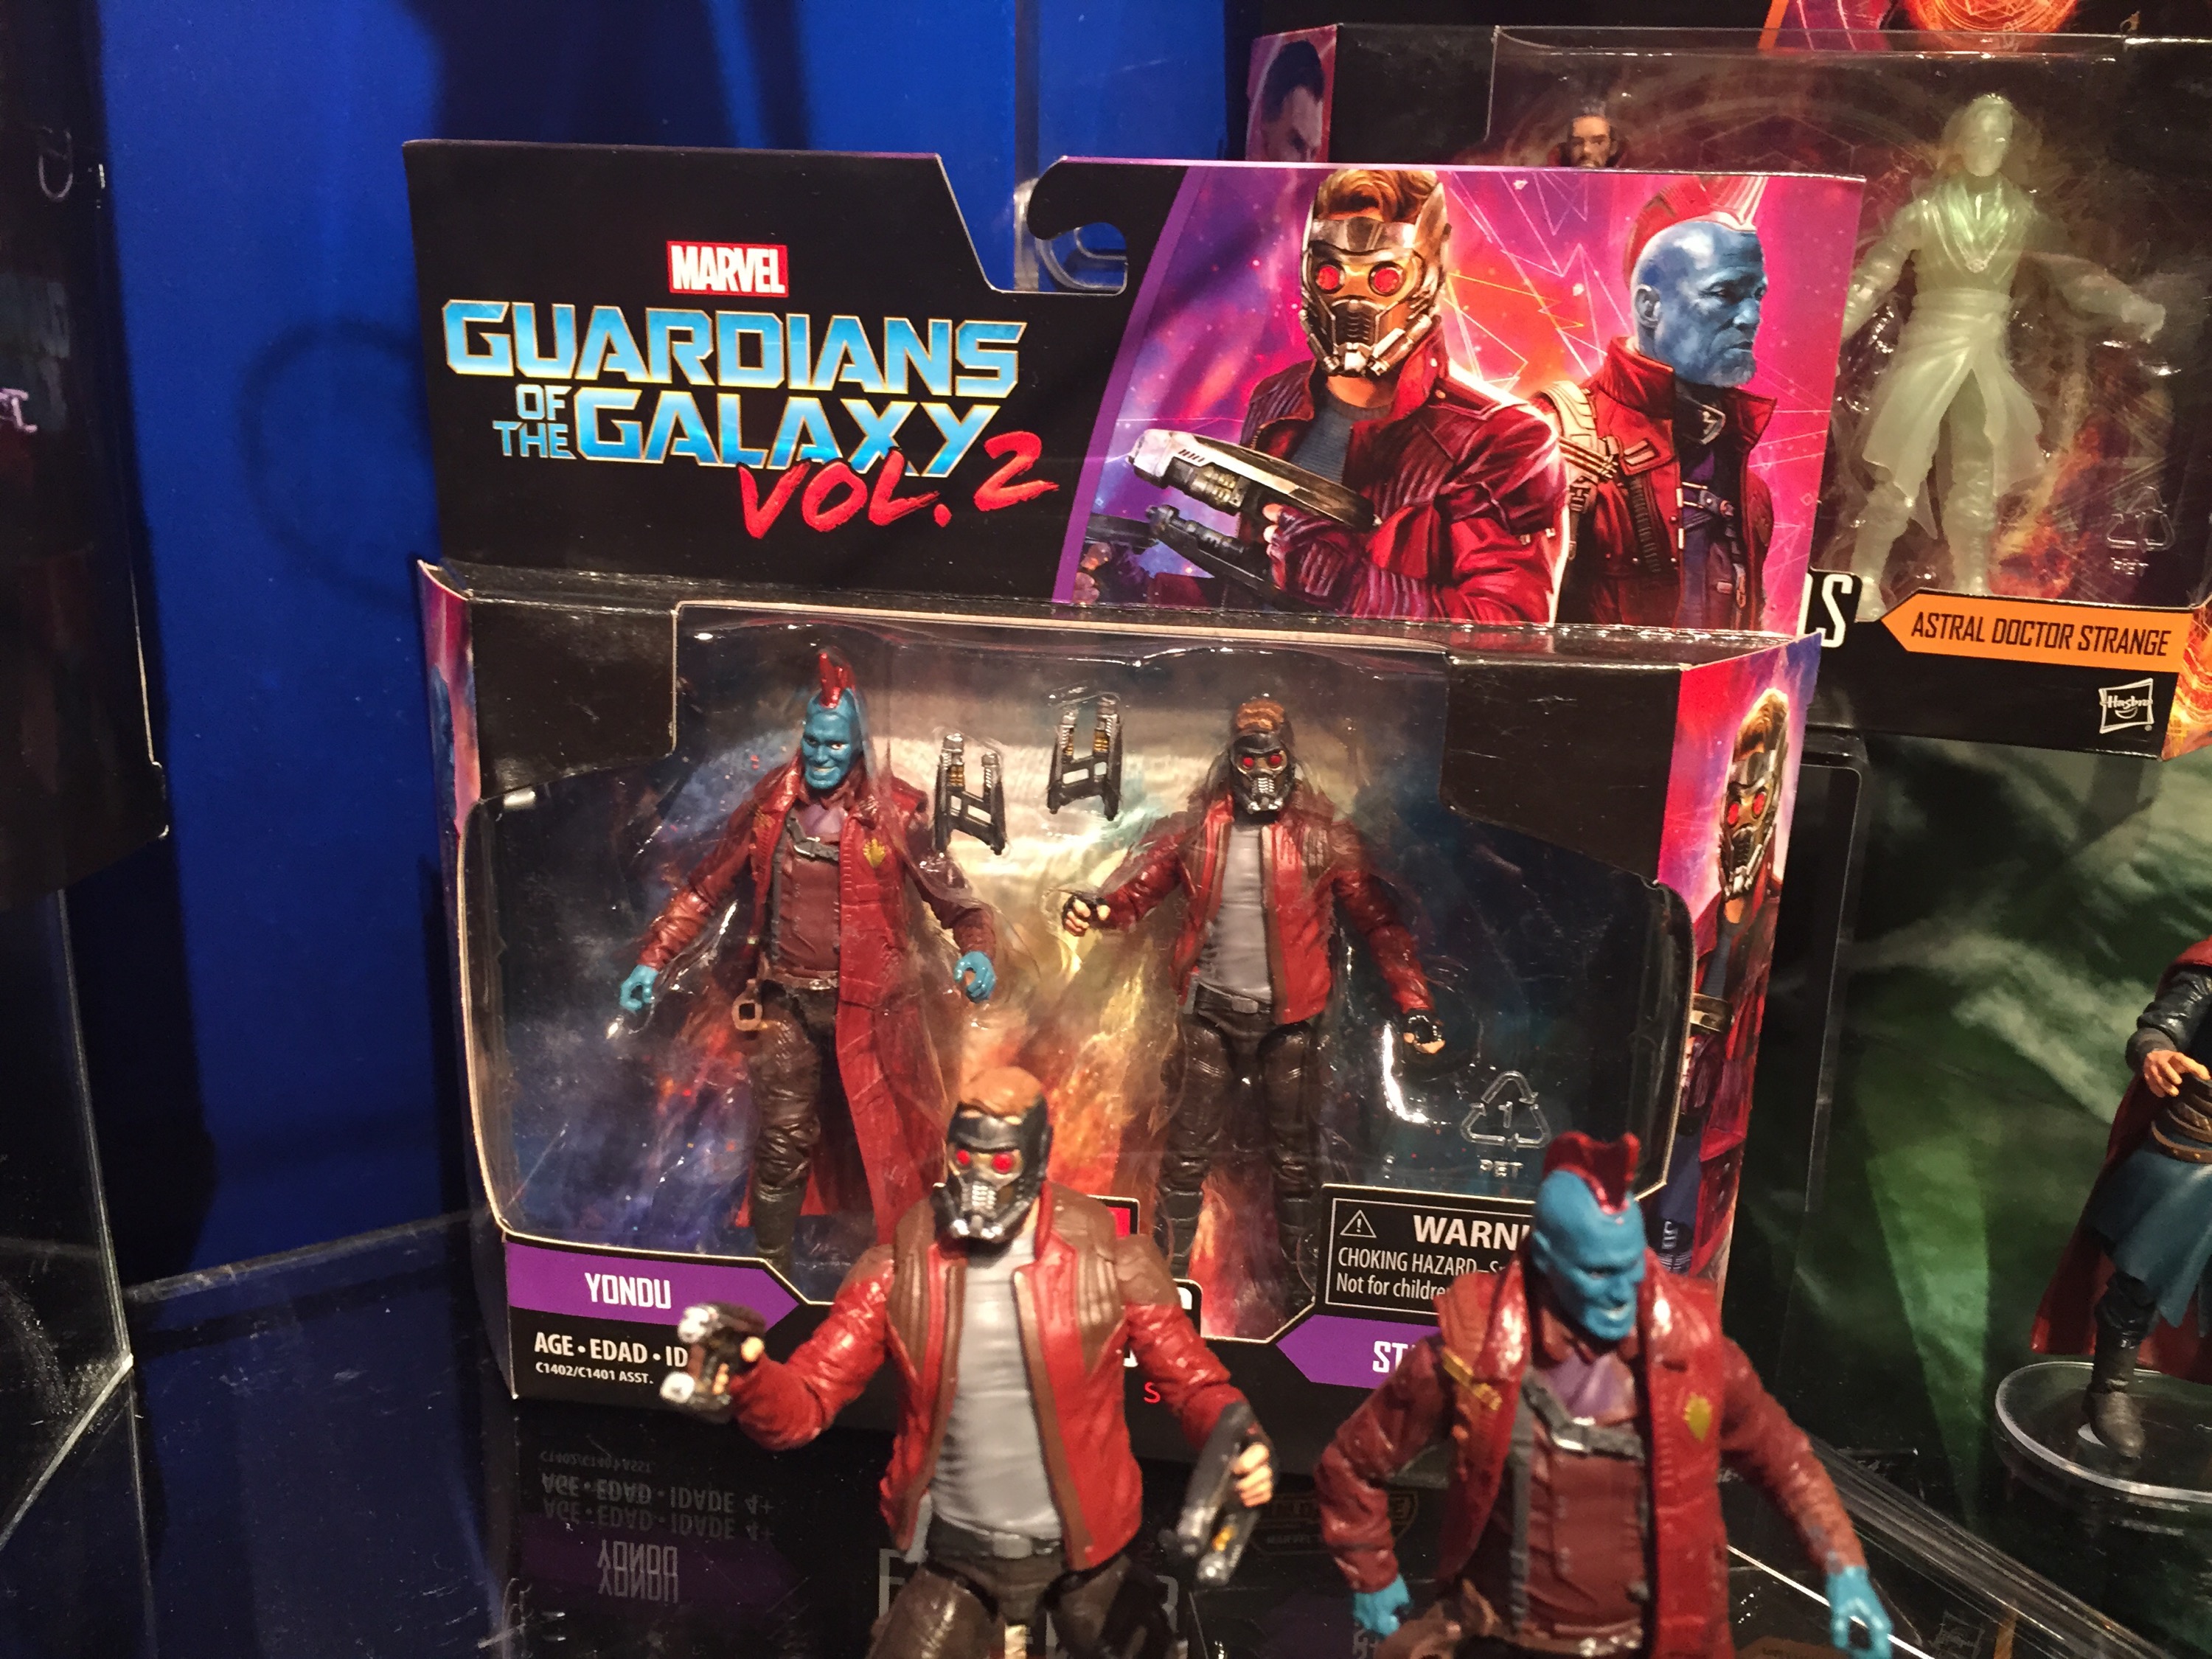 2 Star-Lord & Yondu 2 Pack 3.75" New Marvel Legends Guardians of the Galaxy Vol 